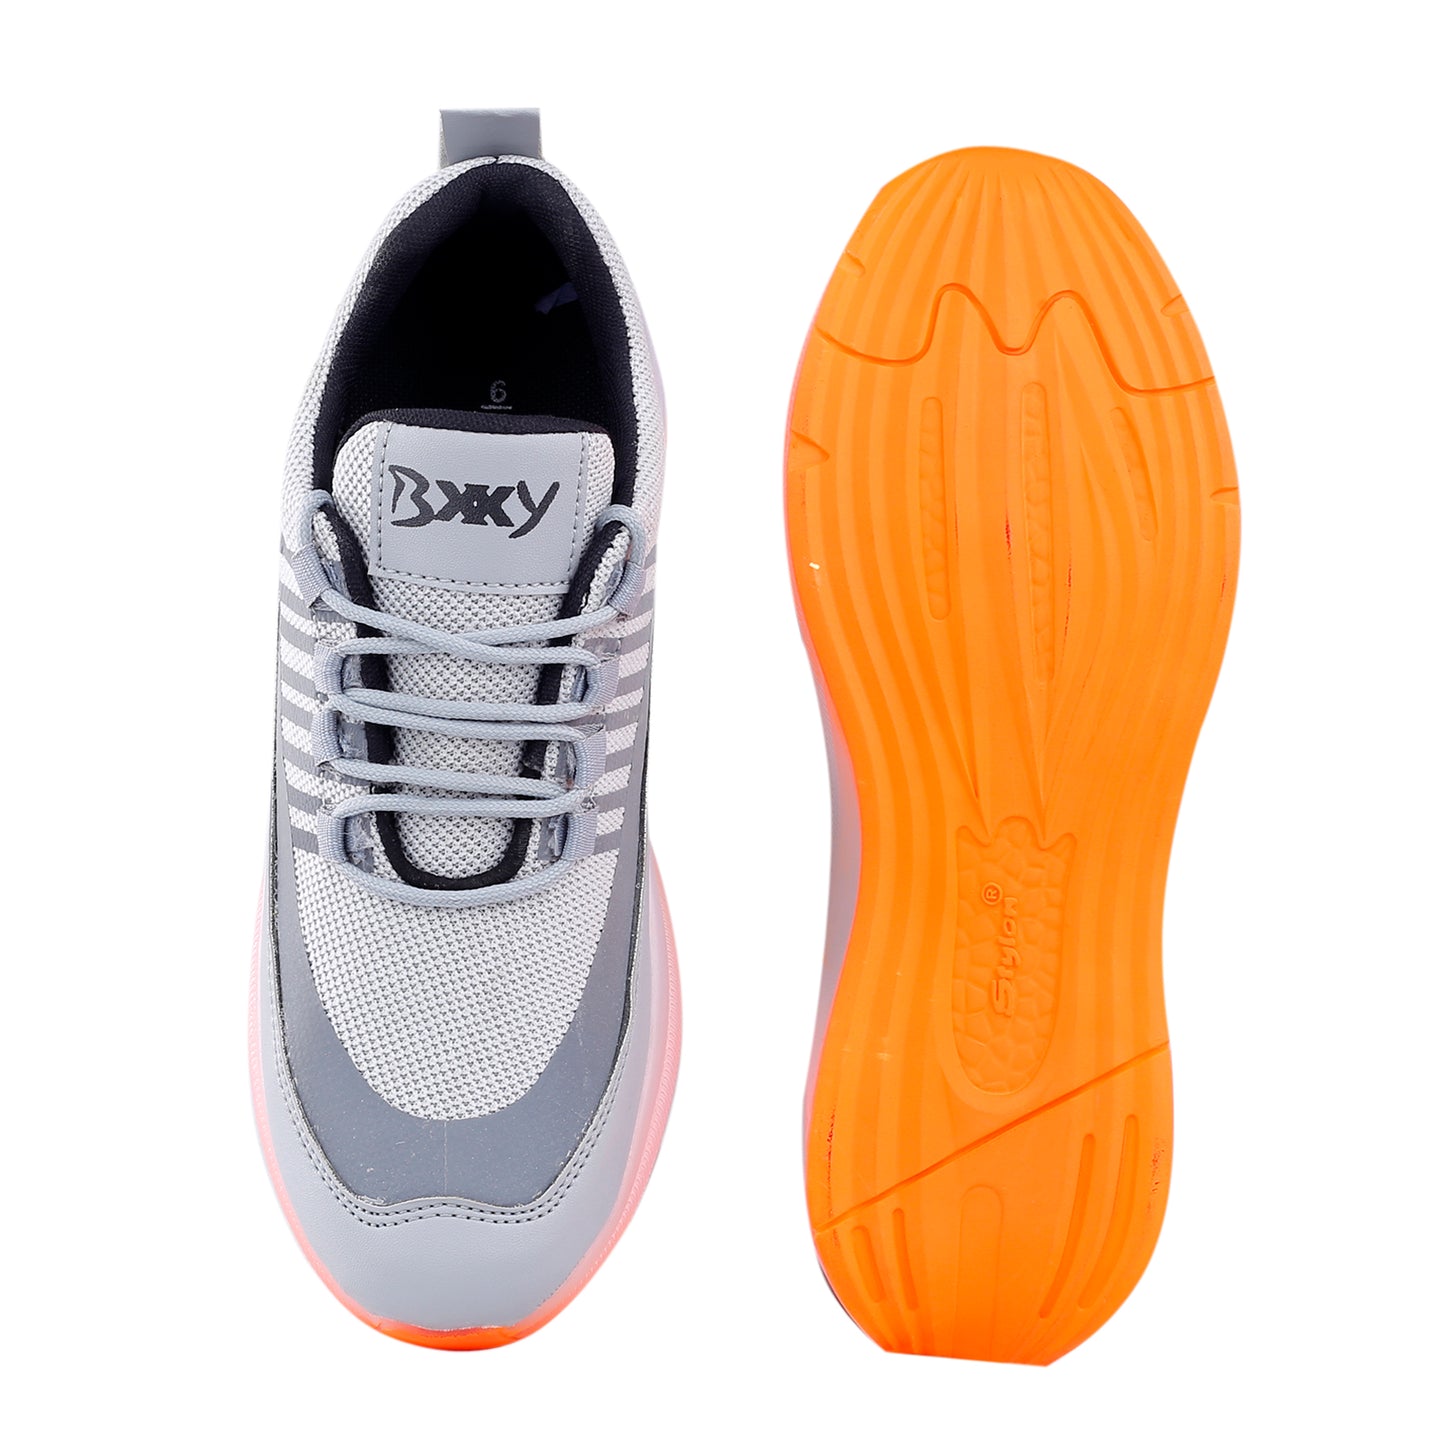 Bxxy's Casual Sports Running Shoes On Transparent Sole